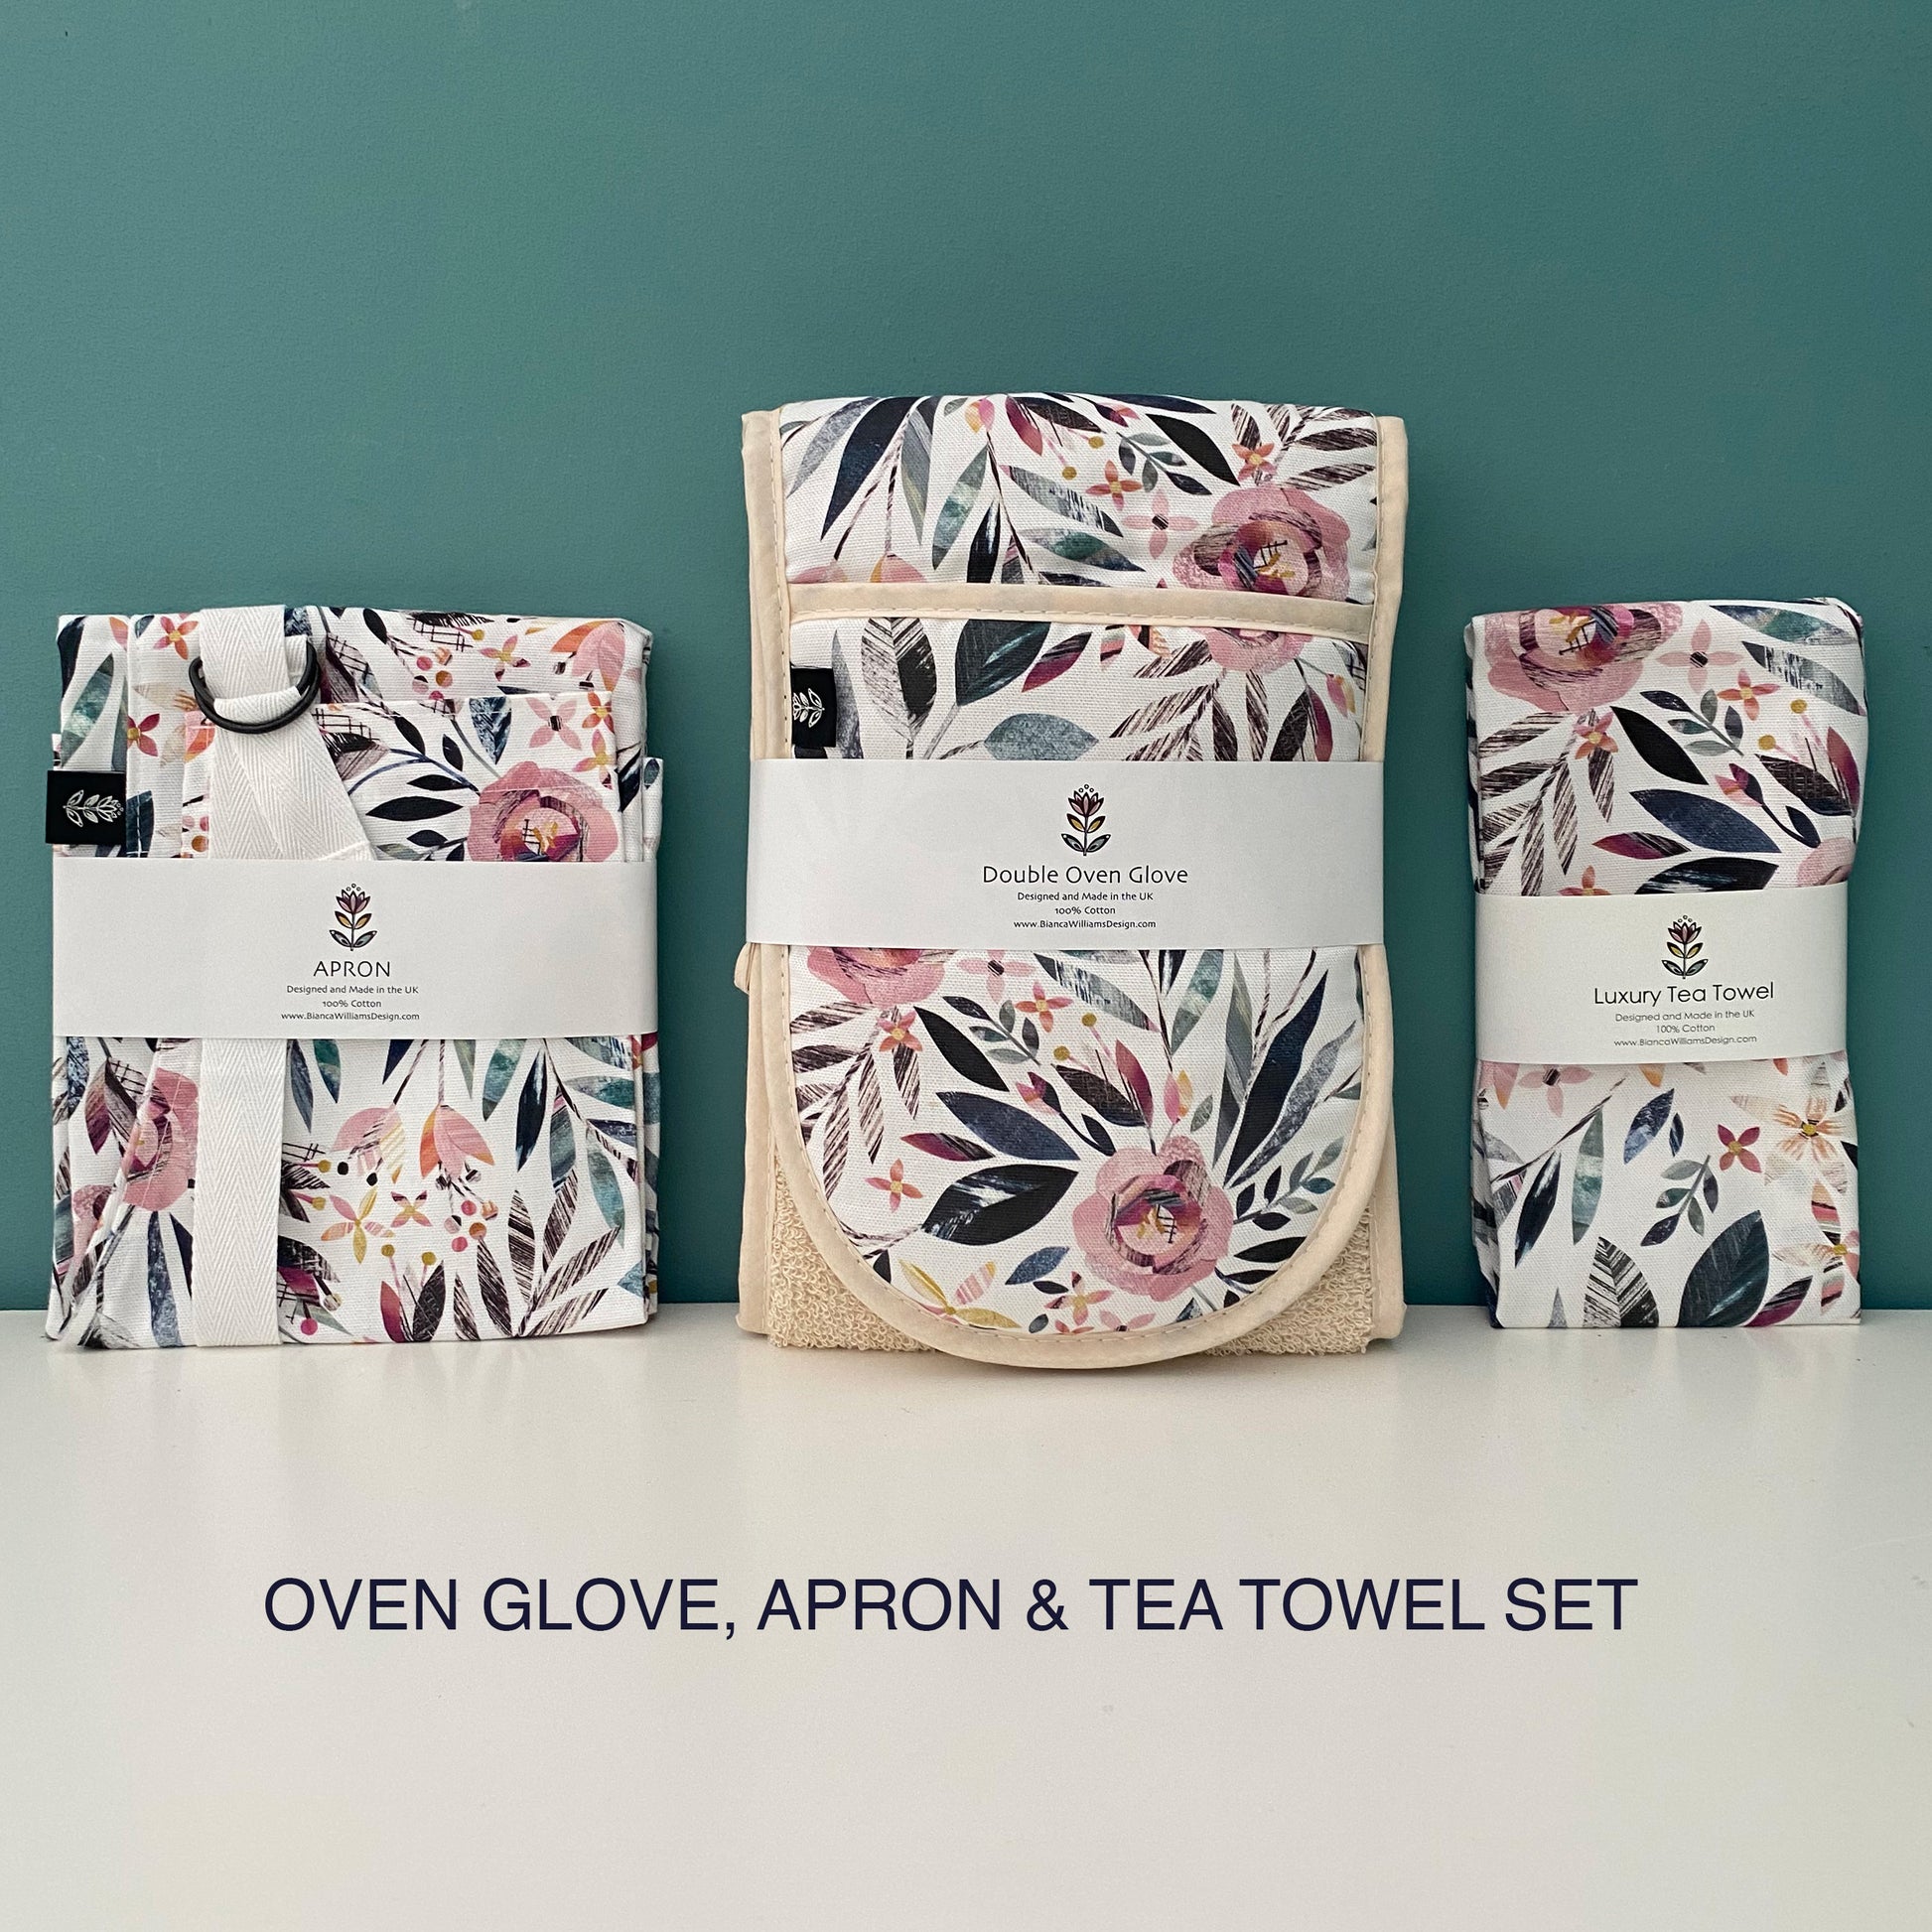 A packaged matching Summer Floral Apron, Double Oven Gloves and Tea Towel have all been placed on a white shelf with a blue green background.